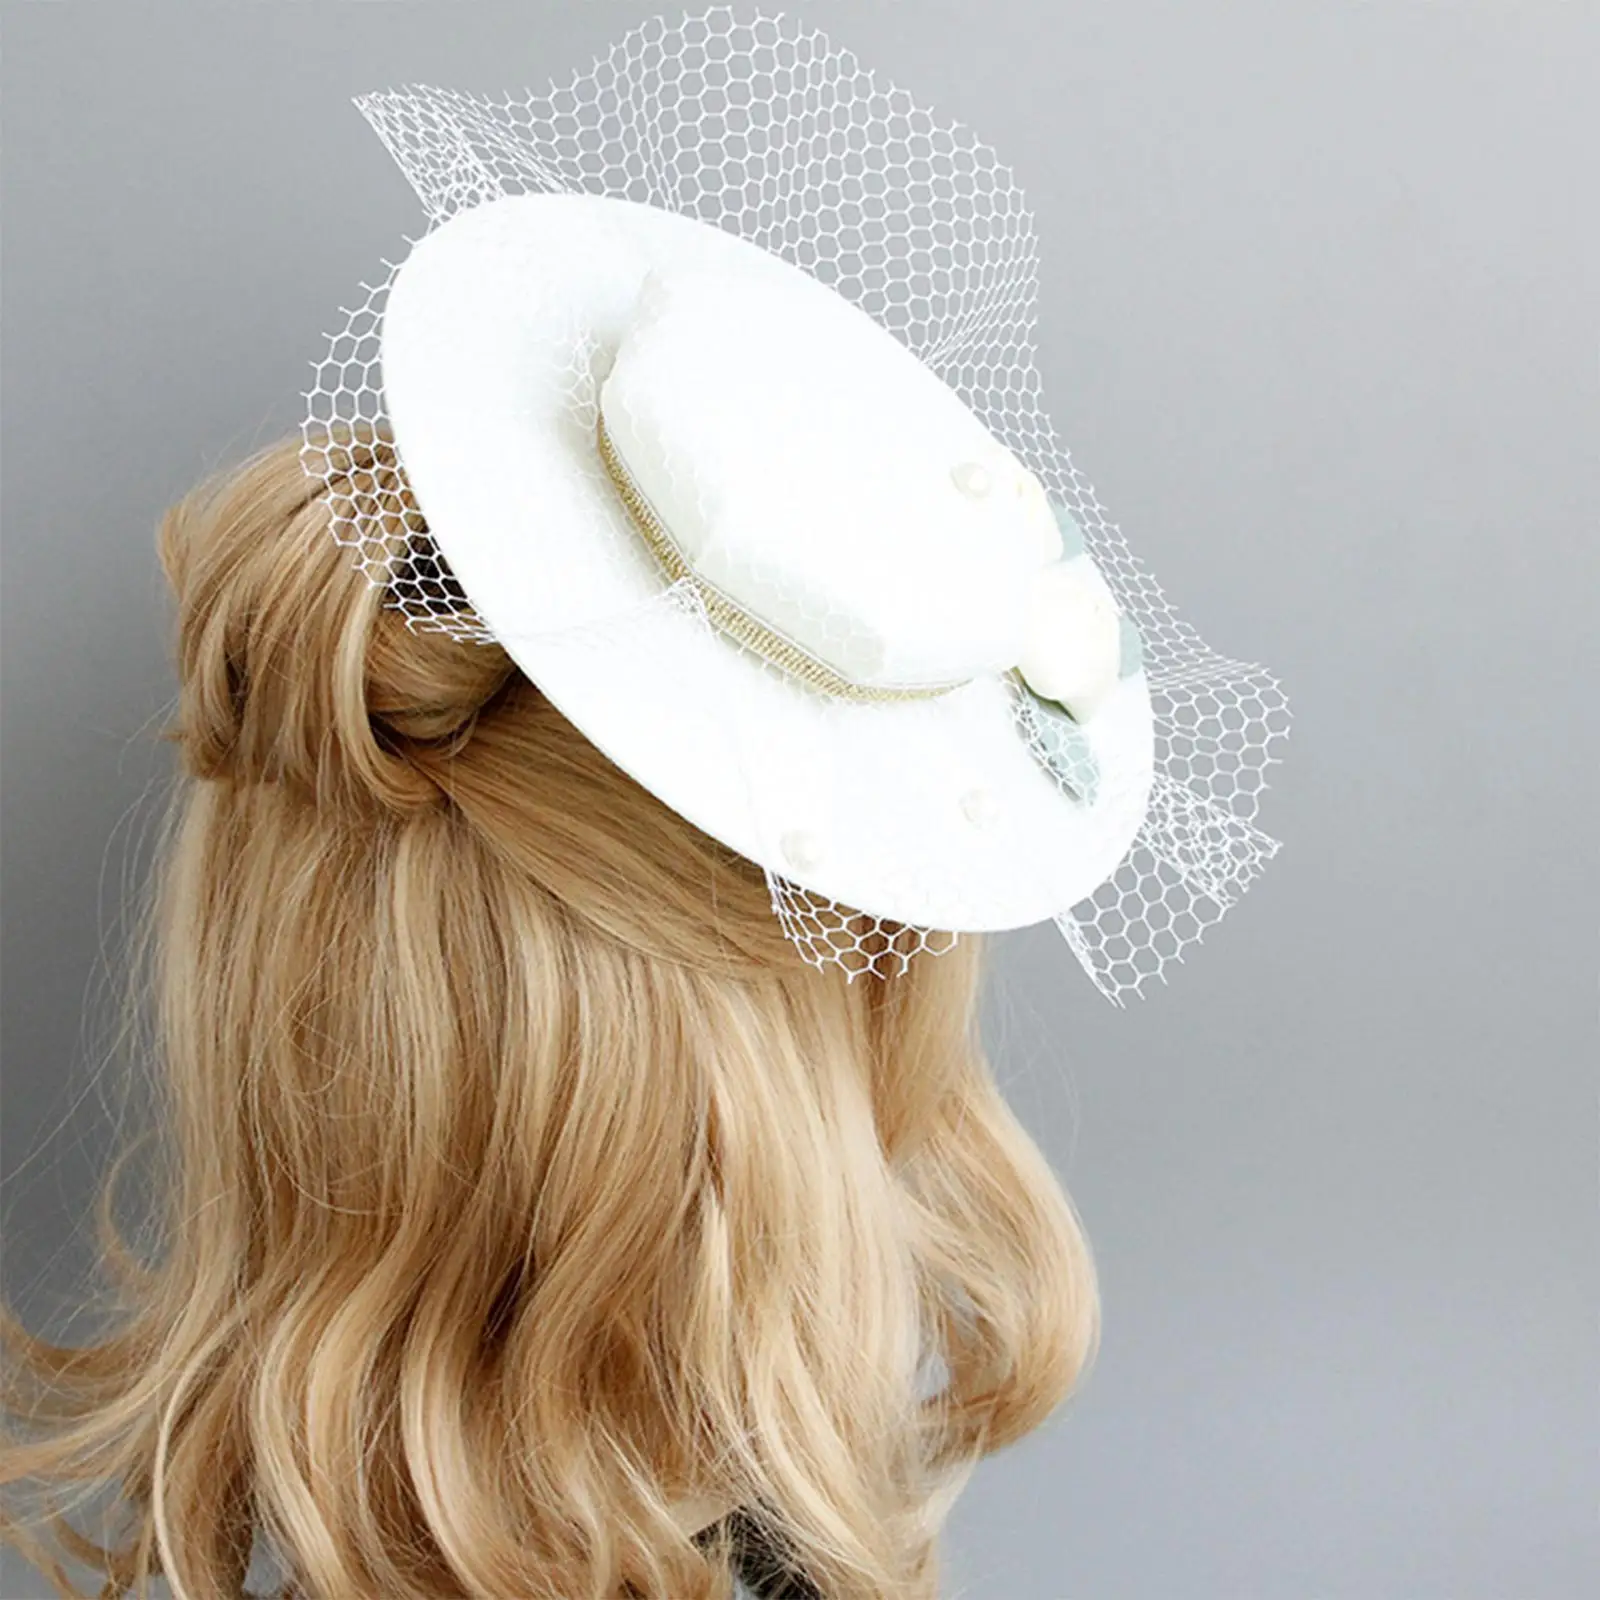 European Court Style Fascinator Top Hat Modern Fashion Headwear for Cocktail Parties Horse Racing